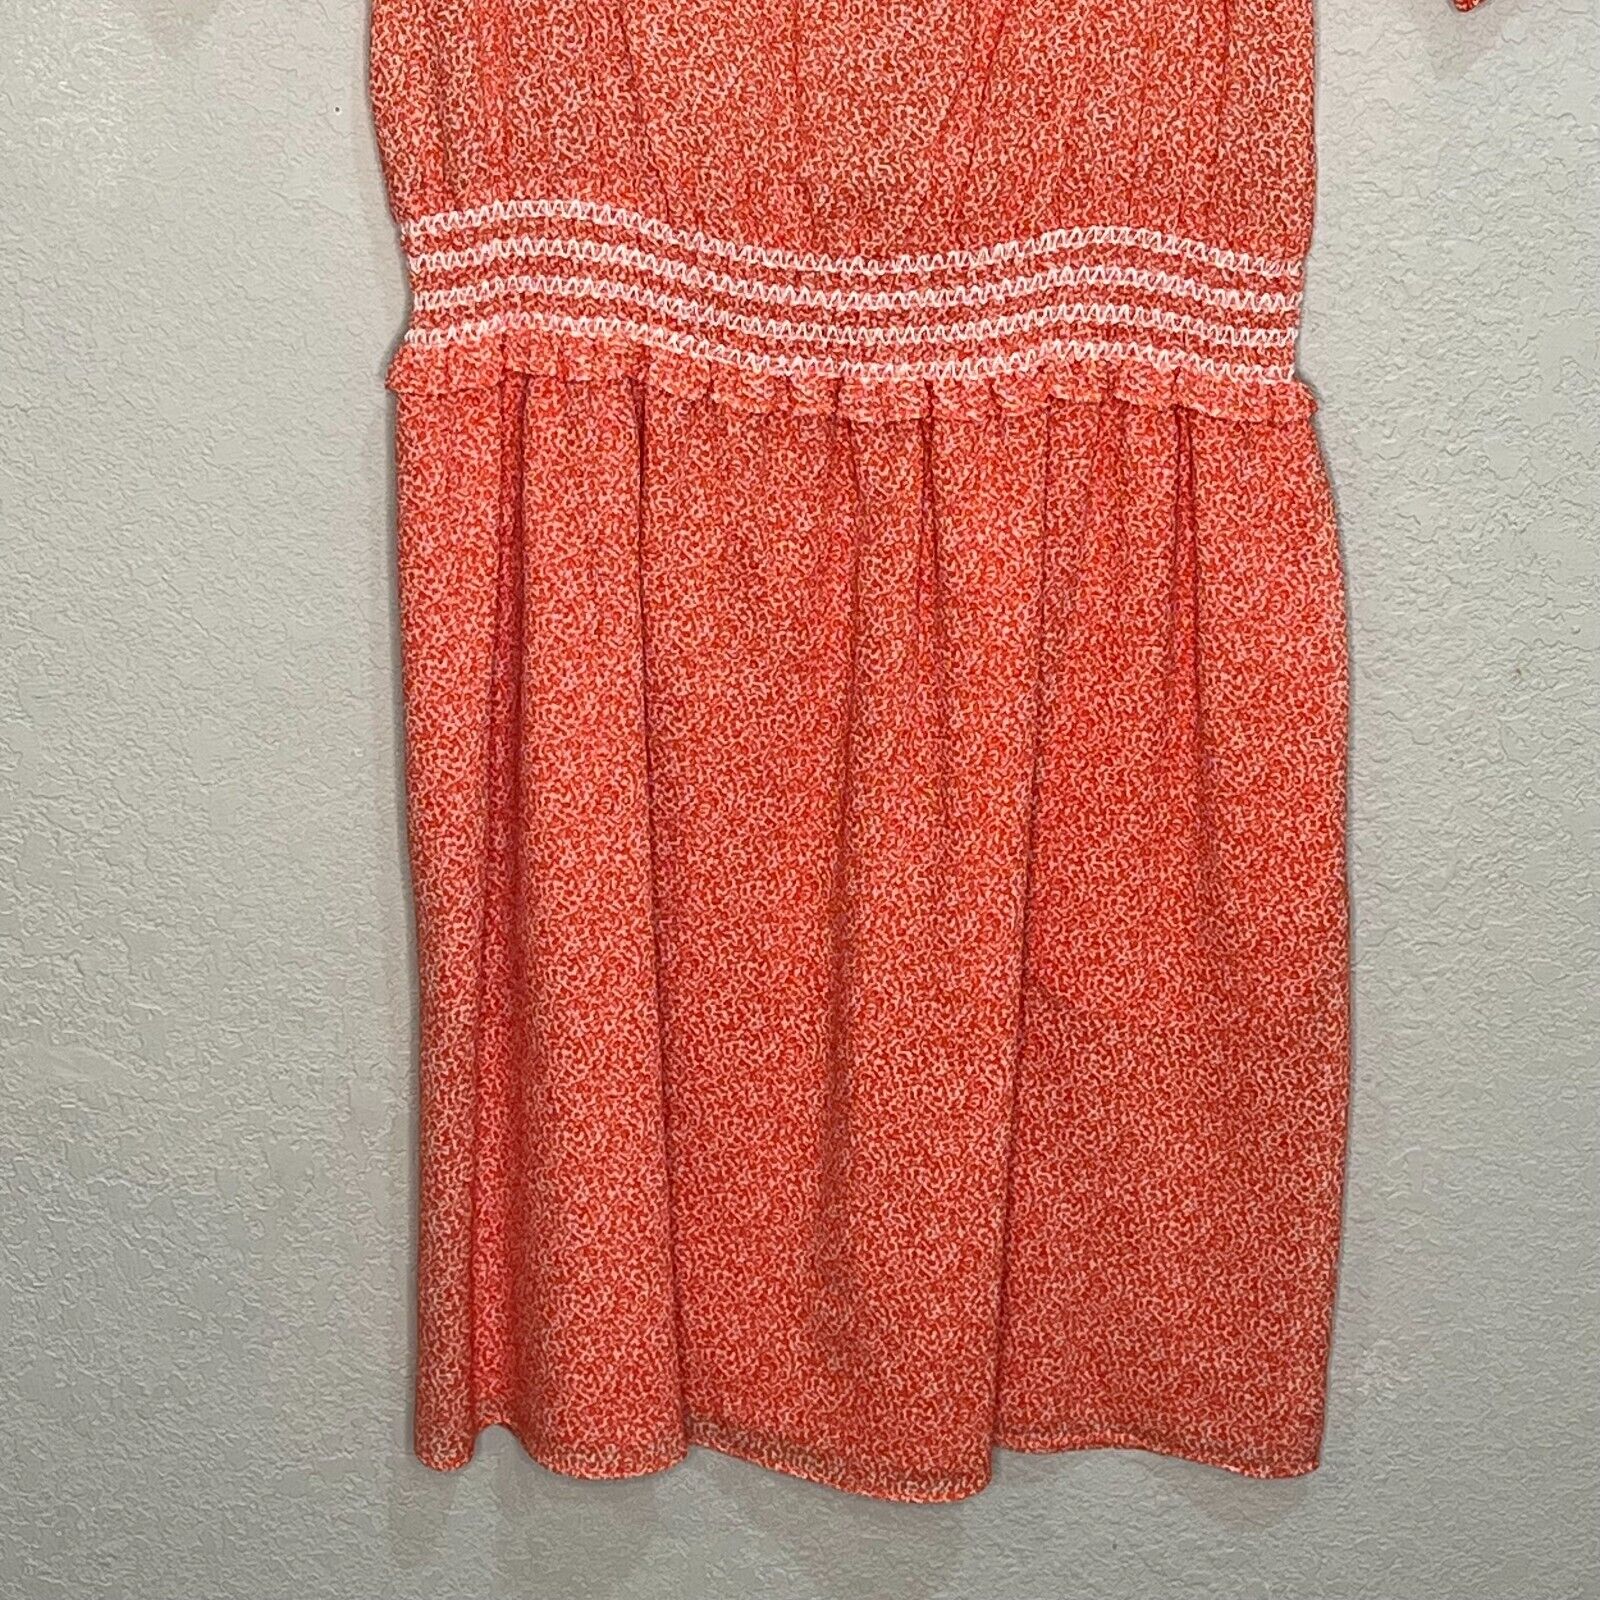 Tory Burch Madison Coral Floral Dress Elastic Waist Size Small